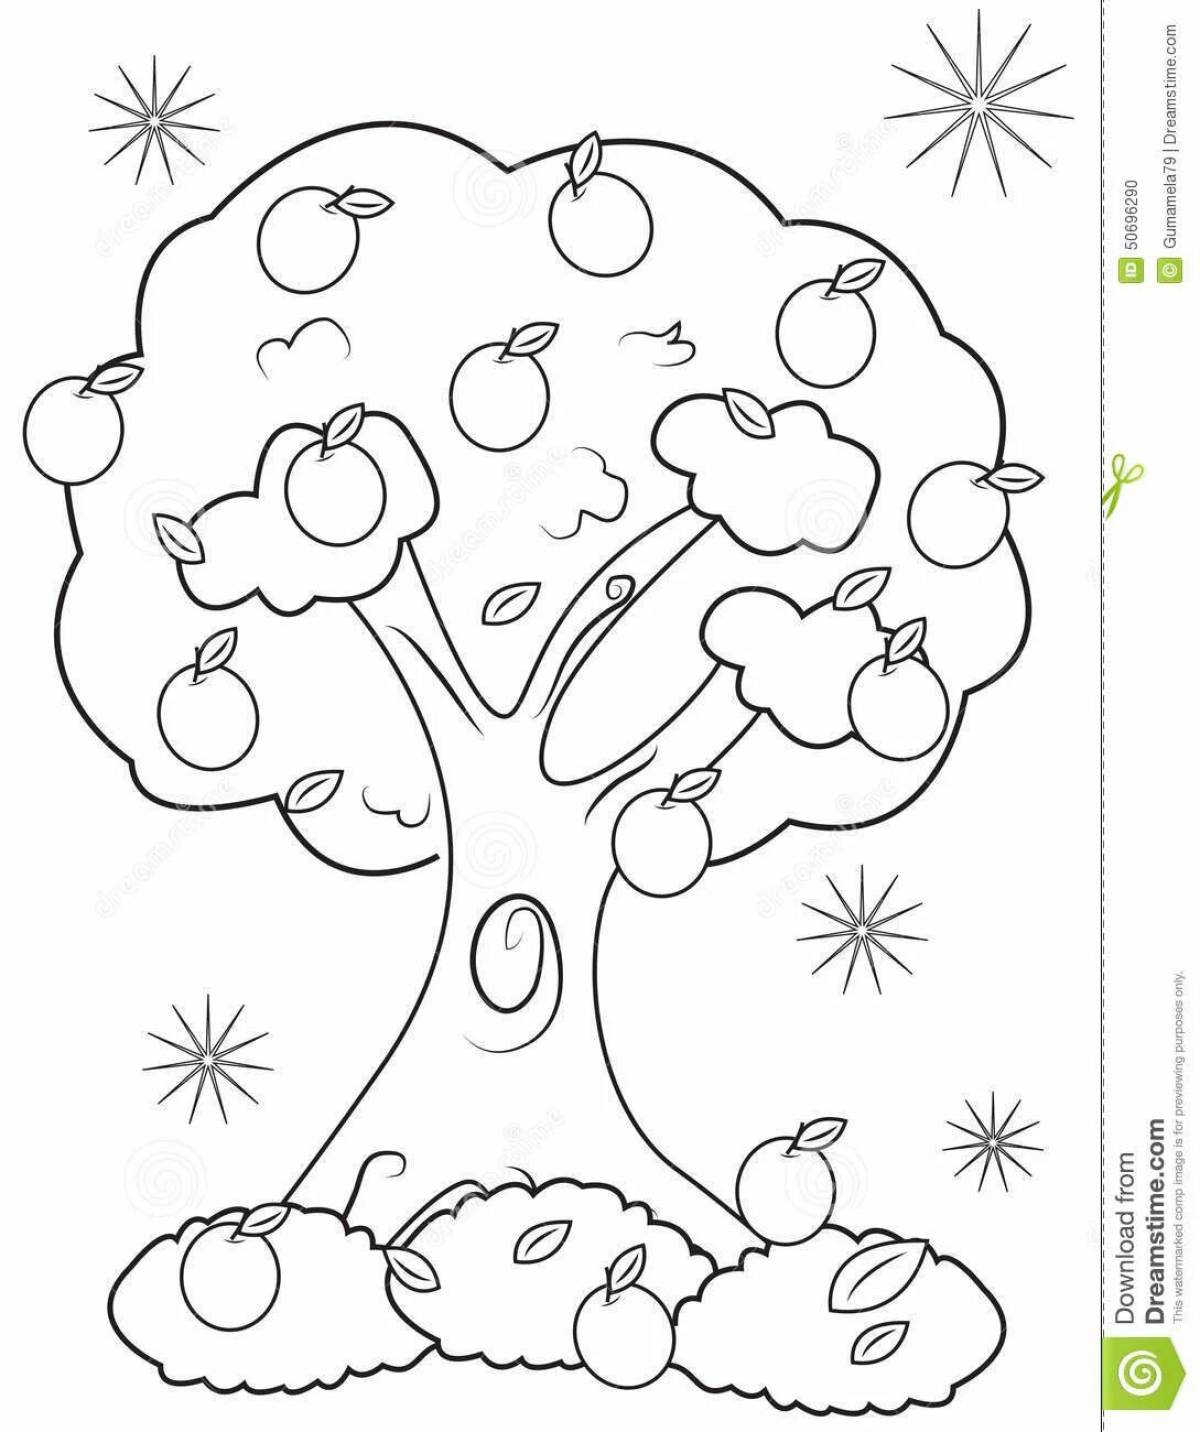 Exciting pear tree coloring page